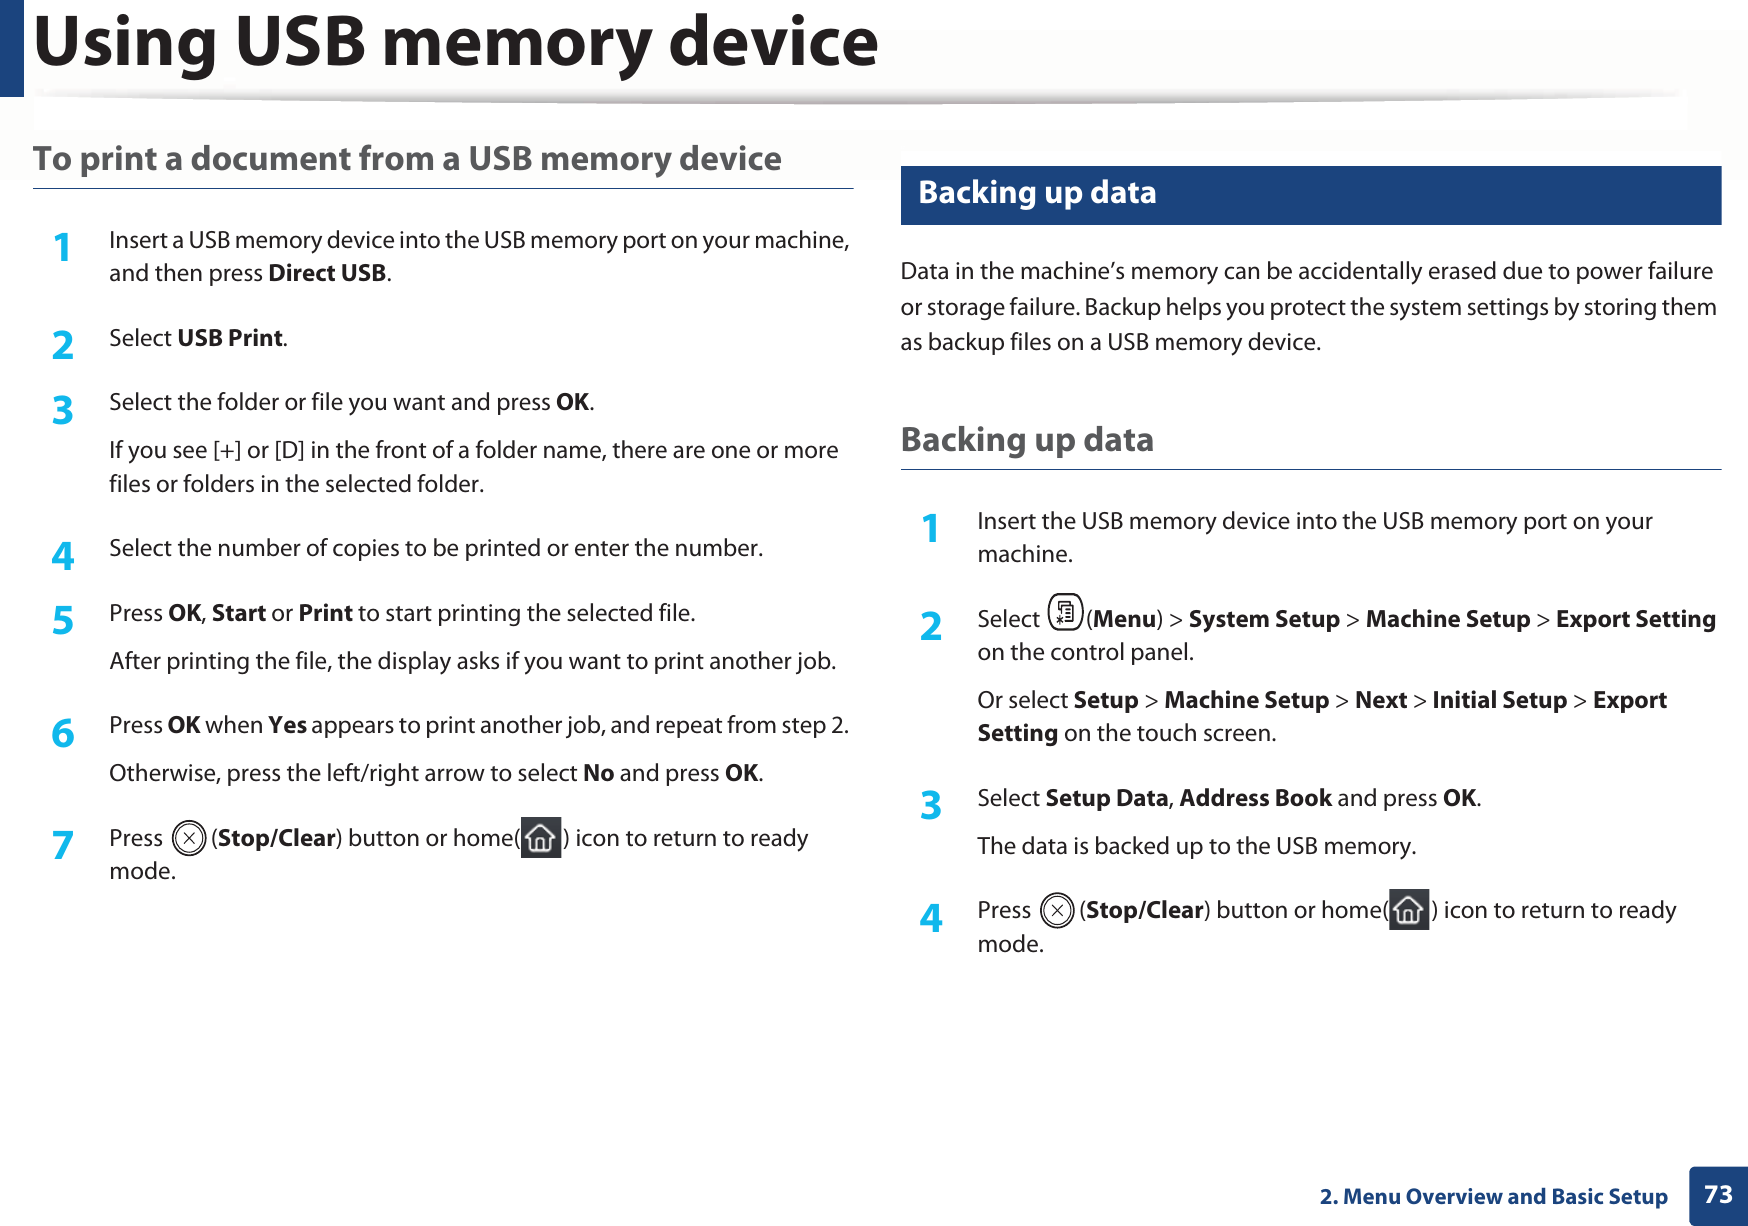 Using USB memory device732. Menu Overview and Basic SetupTo print a document from a USB memory device1Insert a USB memory device into the USB memory port on your machine, and then press Direct USB.2  Select USB Print.3  Select the folder or file you want and press OK.If you see [+] or [D] in the front of a folder name, there are one or more files or folders in the selected folder.4  Select the number of copies to be printed or enter the number.5  Press OK, Start or Print to start printing the selected file. After printing the file, the display asks if you want to print another job.6  Press OK when Yes appears to print another job, and repeat from step 2. Otherwise, press the left/right arrow to select No and press OK.7  Press (Stop/Clear) button or home( ) icon to return to ready mode.27 Backing up data Data in the machine’s memory can be accidentally erased due to power failure or storage failure. Backup helps you protect the system settings by storing them as backup files on a USB memory device.Backing up data1Insert the USB memory device into the USB memory port on your machine.2  Select (Menu) &gt; System Setup &gt; Machine Setup &gt; Export Setting on the control panel.Or select Setup &gt; Machine Setup &gt; Next &gt; Initial Setup &gt; Export Setting on the touch screen.3  Select Setup Data, Address Book and press OK. The data is backed up to the USB memory.4  Press (Stop/Clear) button or home( ) icon to return to ready mode.